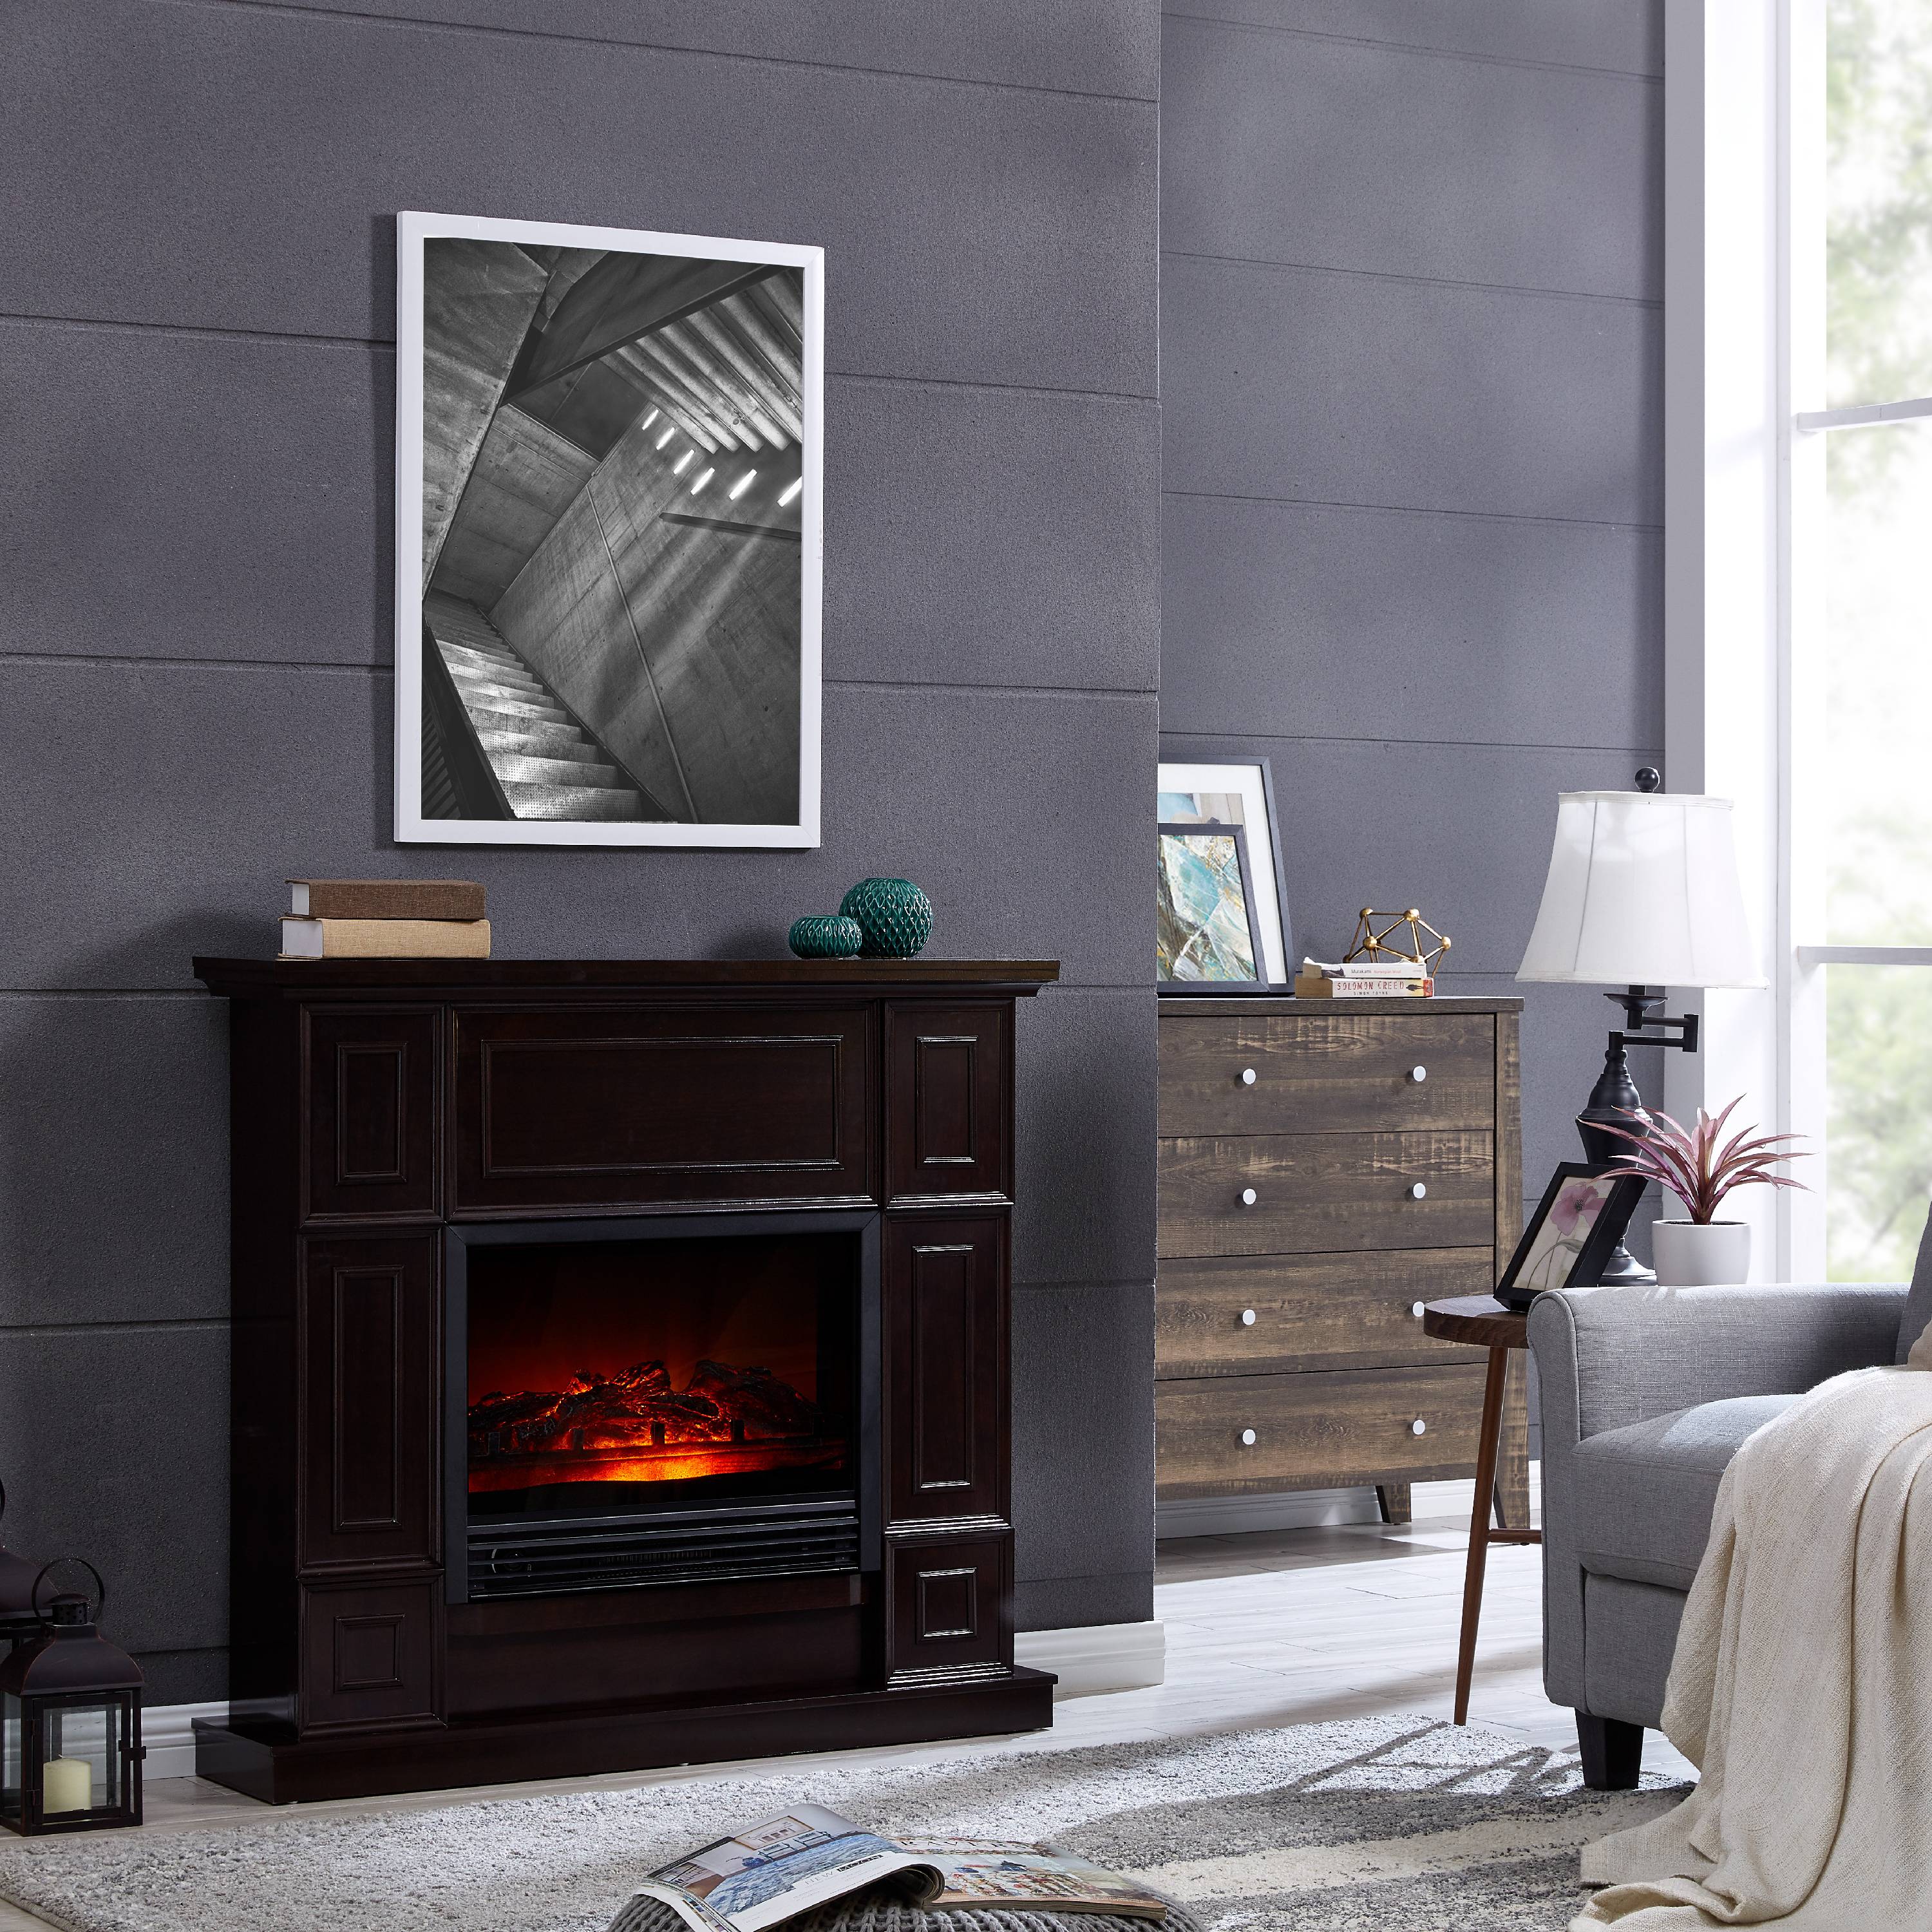 Bold Flame 43.31 inch Electric Fireplace in Dark Chocolate - image 5 of 7